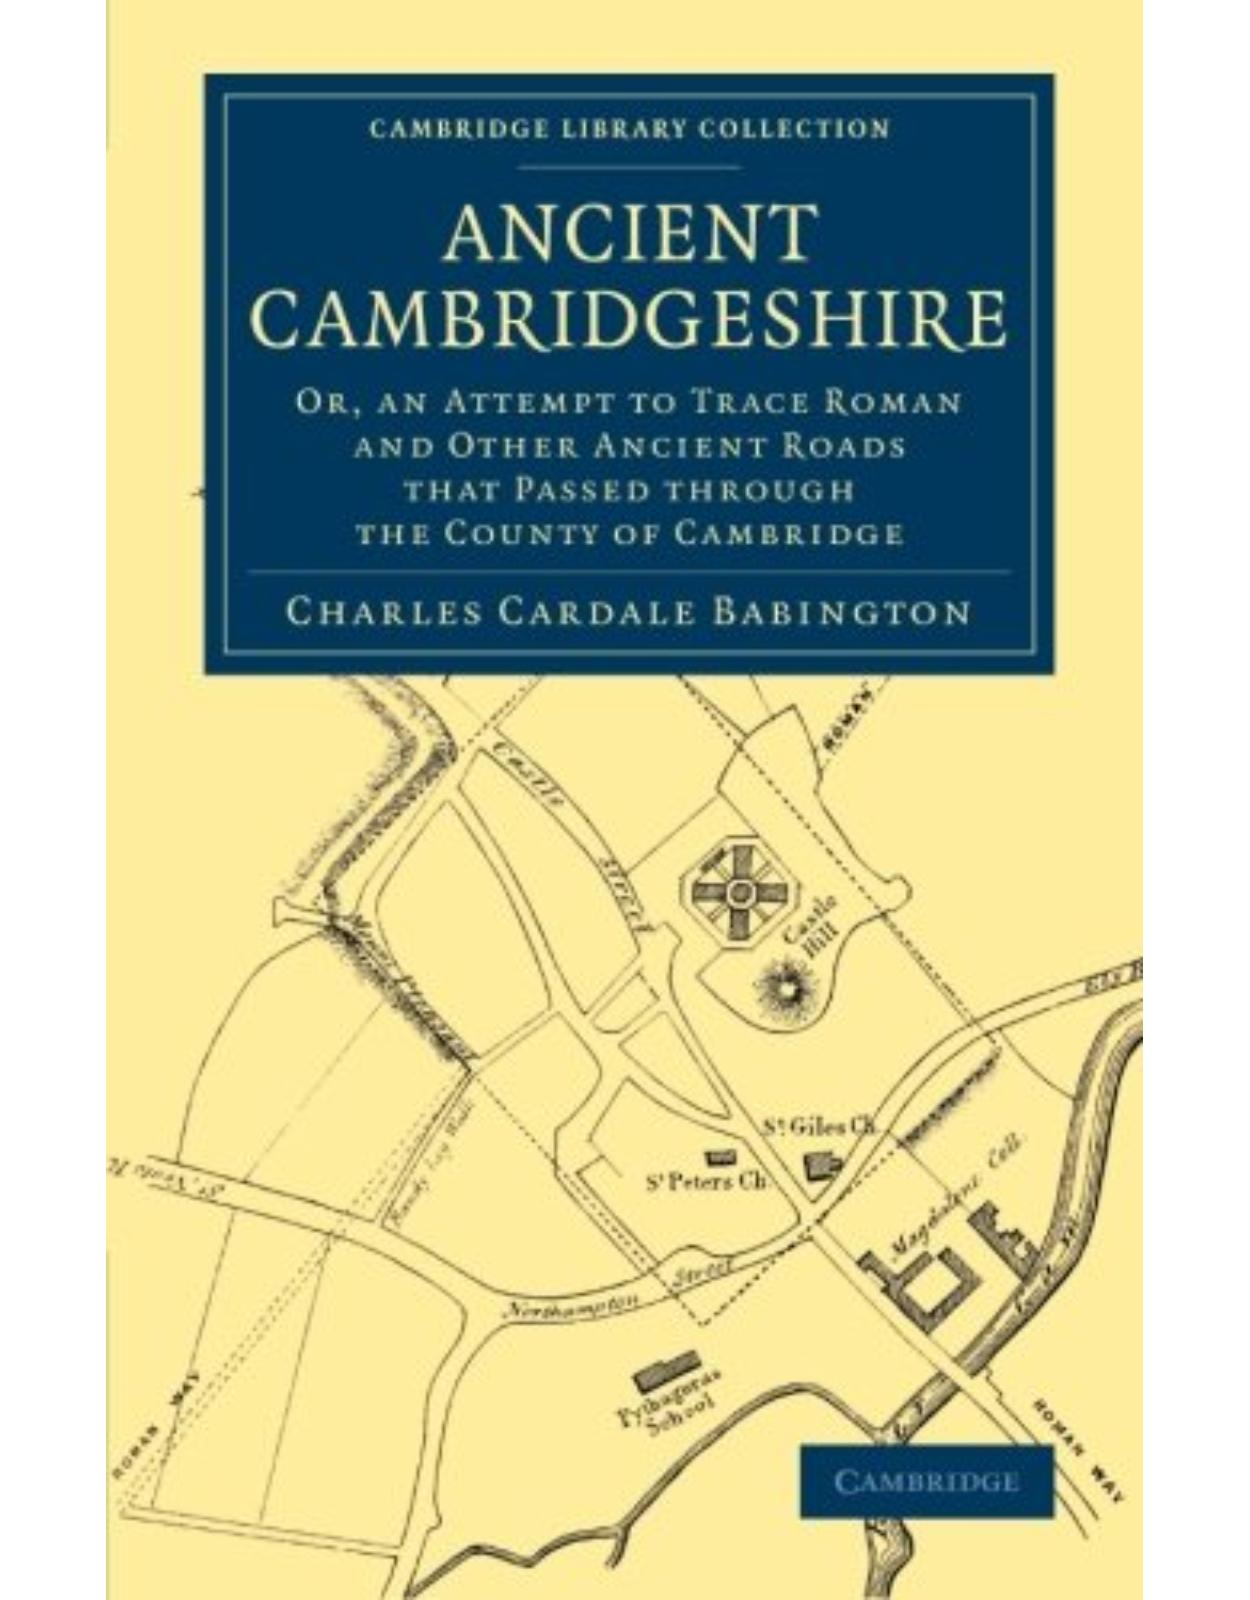 Ancient Cambridgeshire: Or, an Attempt to Trace Roman and Other Ancient Roads that Passed through the County of Cambridge (Cambridge Library Collection - Cambridge) 